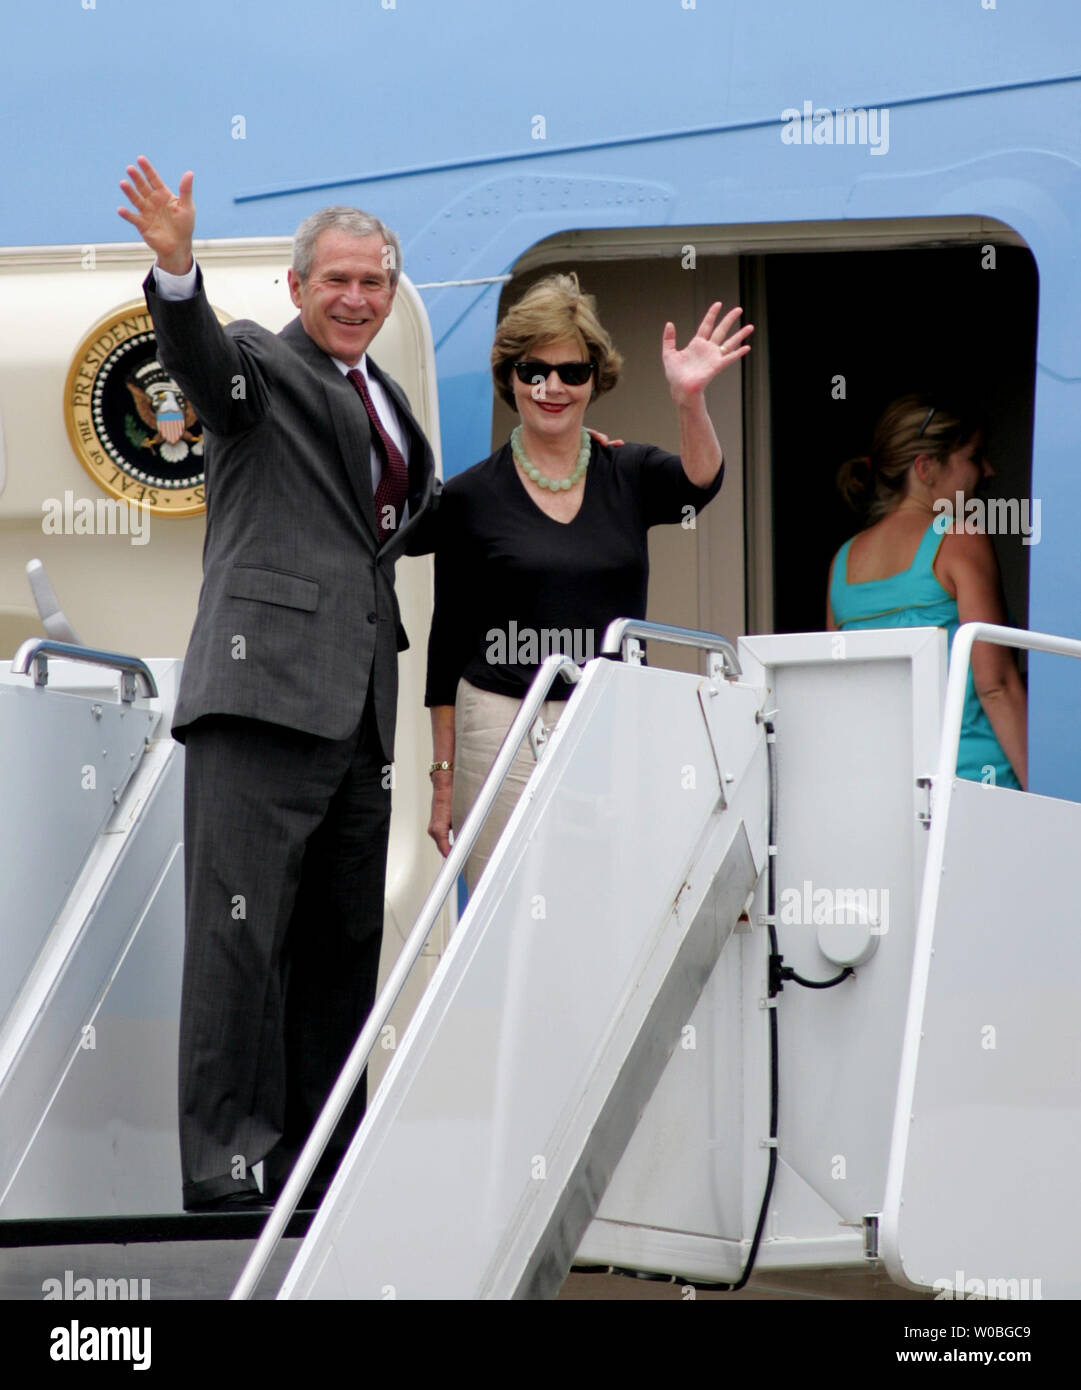 U.S. President George W. Bush, First Lady Laura Bush (C) and their daughter Jenna Bush (R) board Air Force One in Waco, Texas on June 17, 2007. The Bush family spent the Fathers Day weekend at his ranch in Crawford, Texas and will travel back to Washington. (UPI Photo/Ron Russek II) Stock Photo